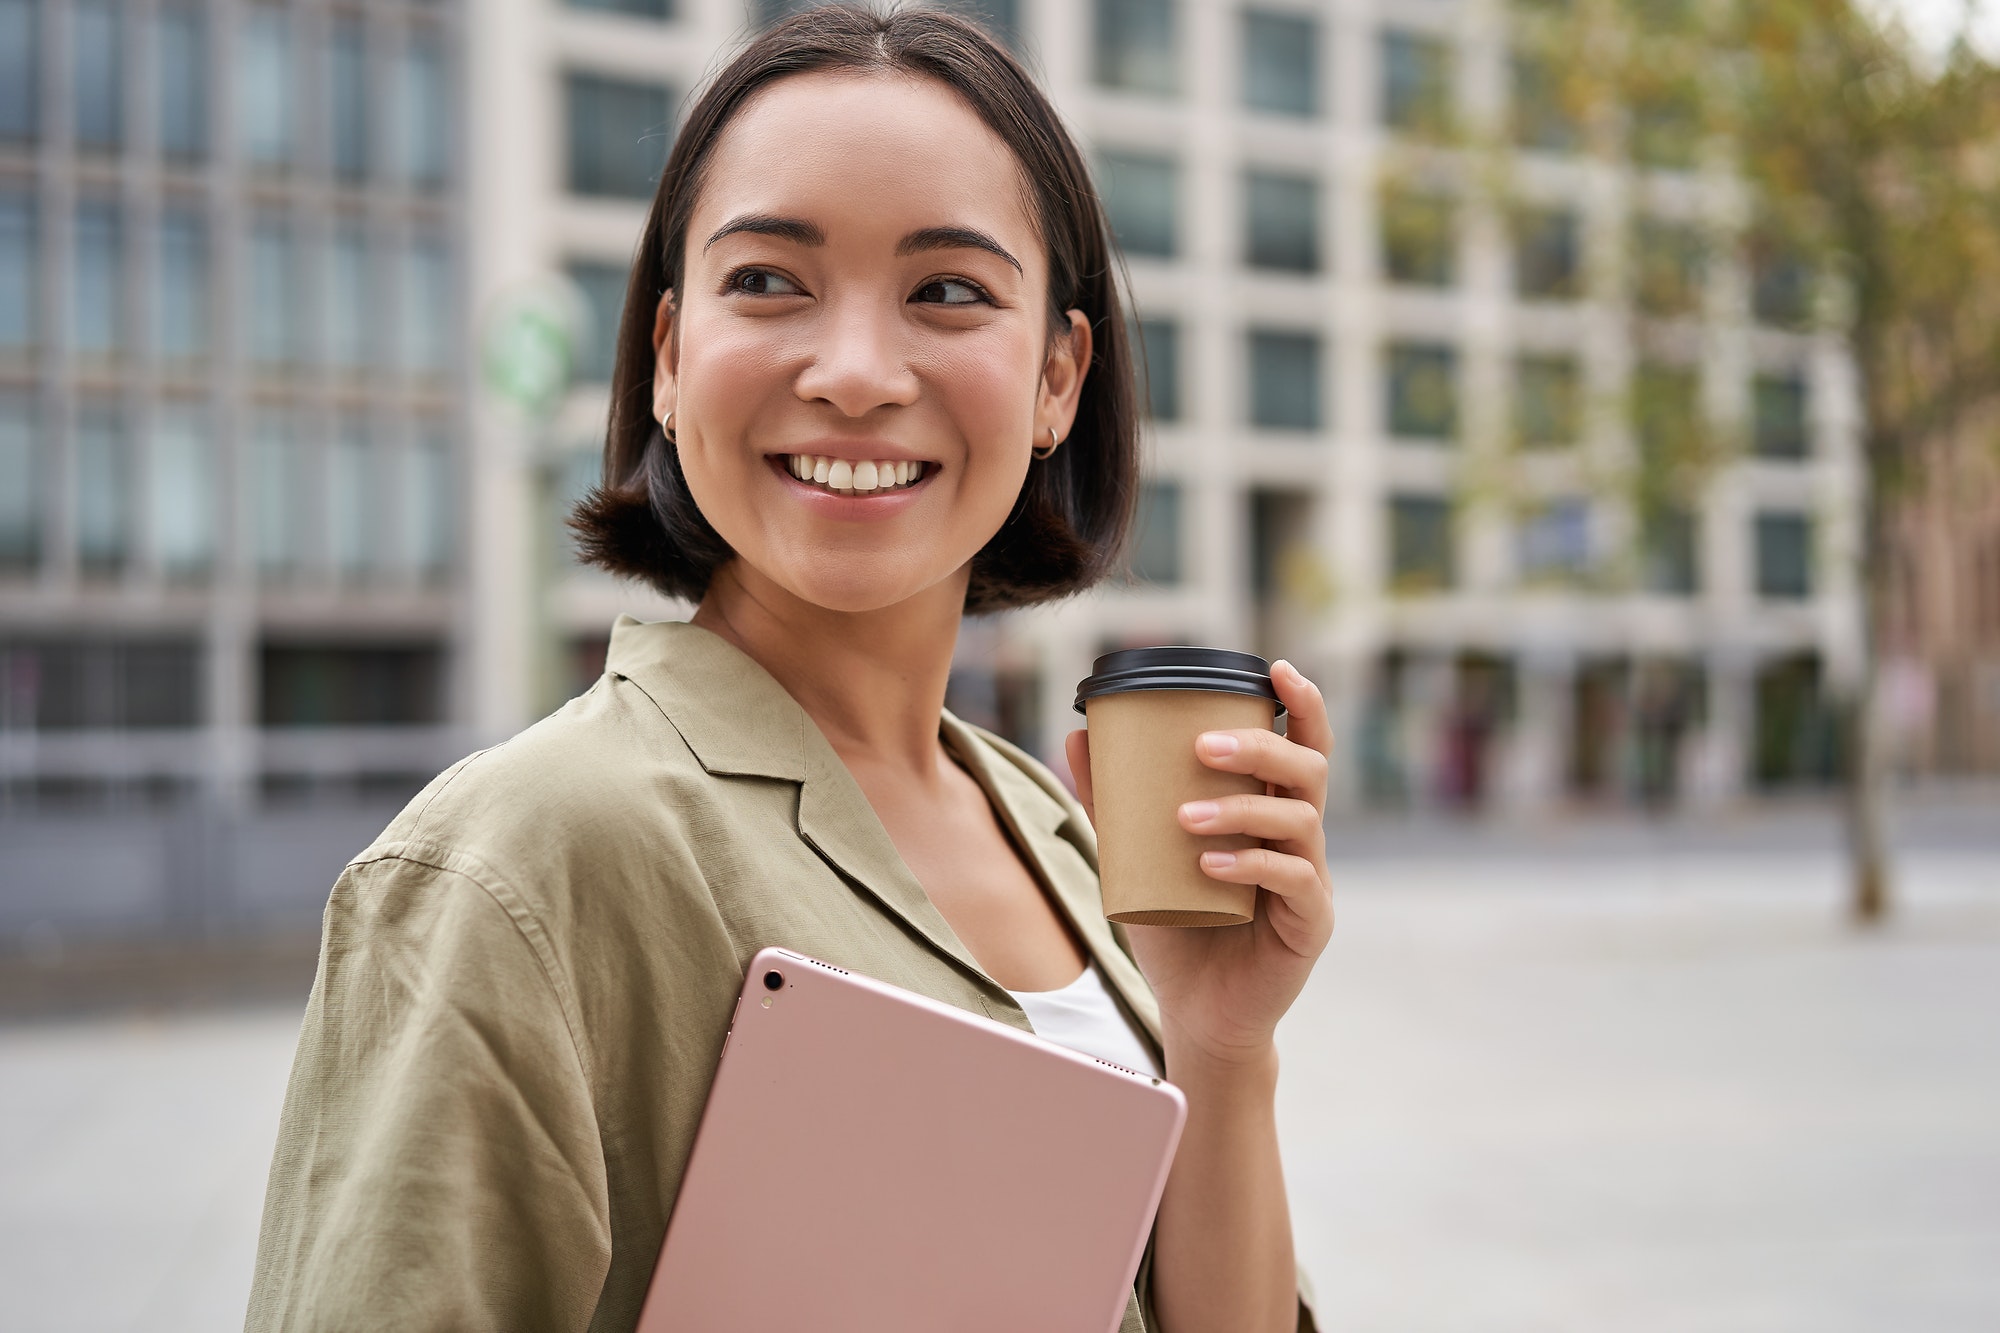 Portrait of asian girl with tablet, drinks coffee on street, walking in city centre